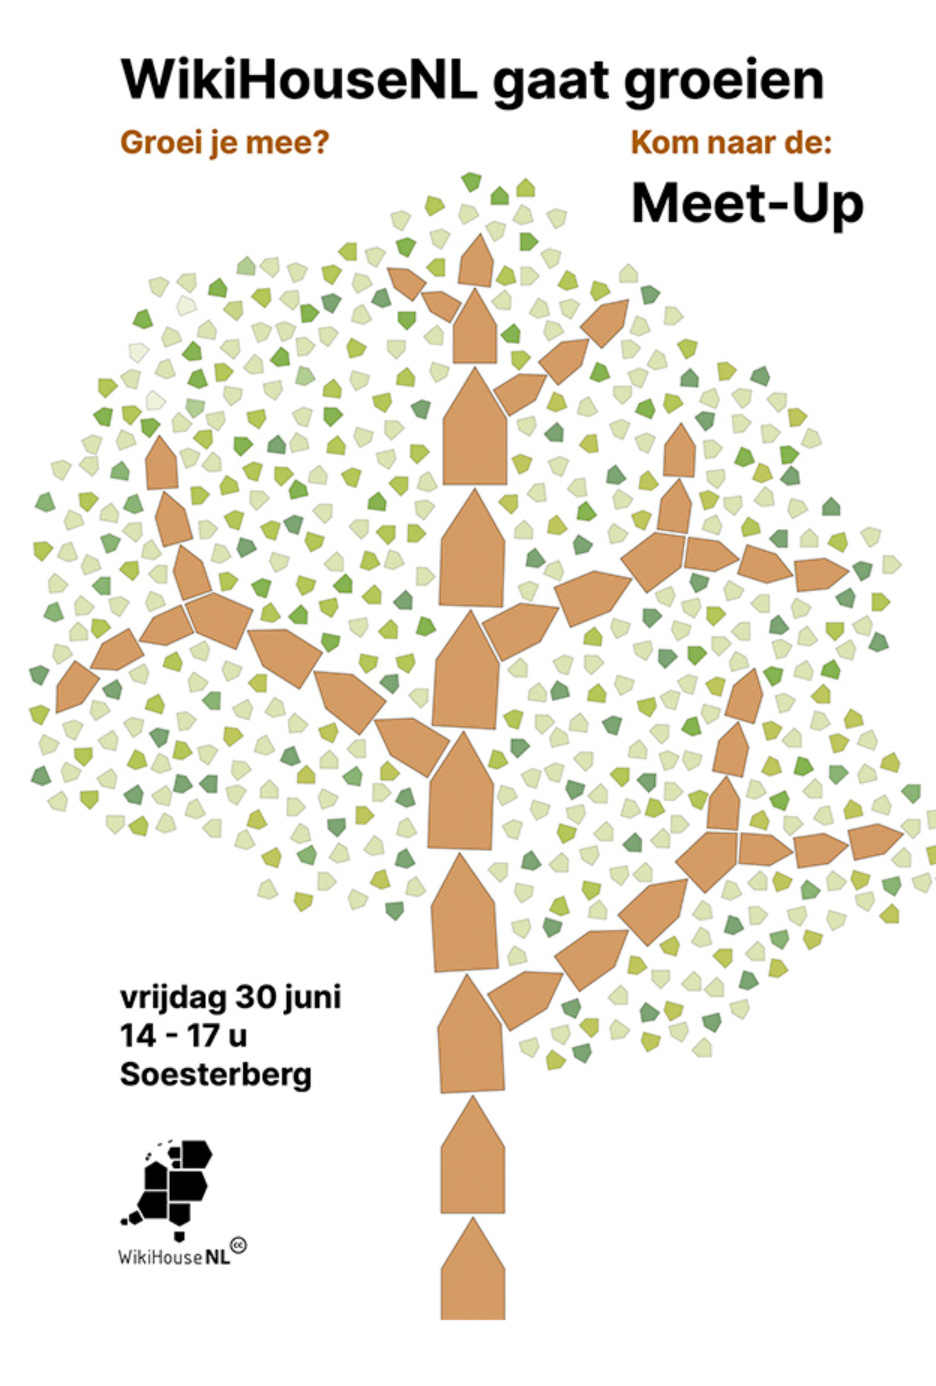 Poster in Dutch advertising the WikiHouseNL meeting on 30 June between 14h and 17h